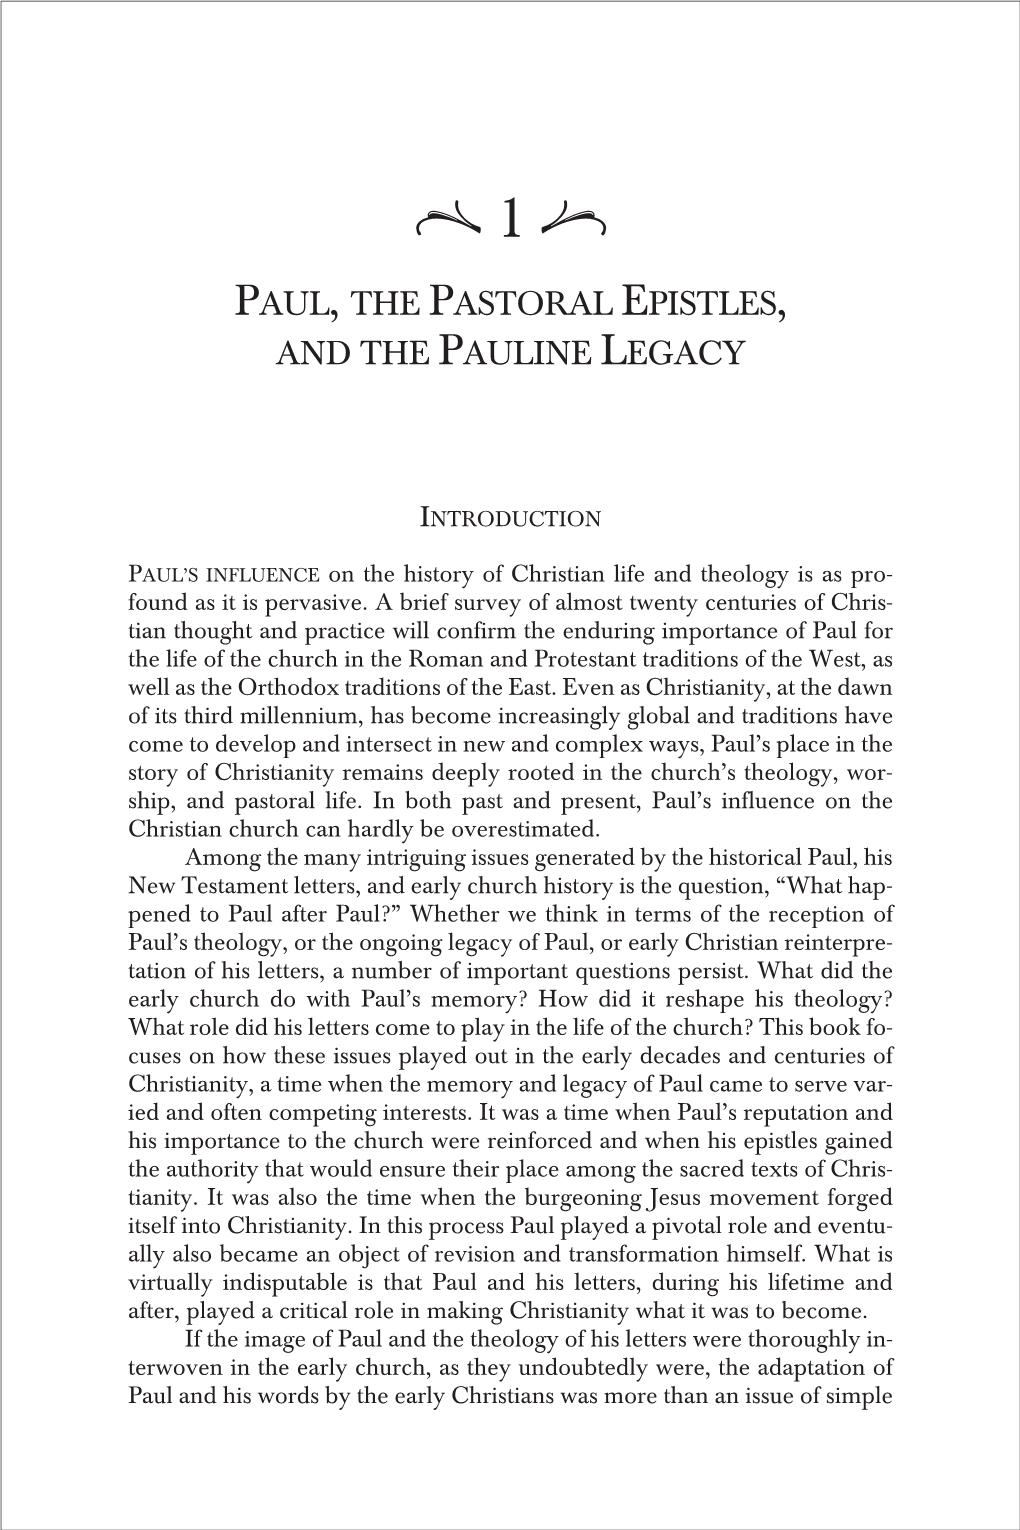 Paul, the Pastoral Epistles, and the Pauline Legacy